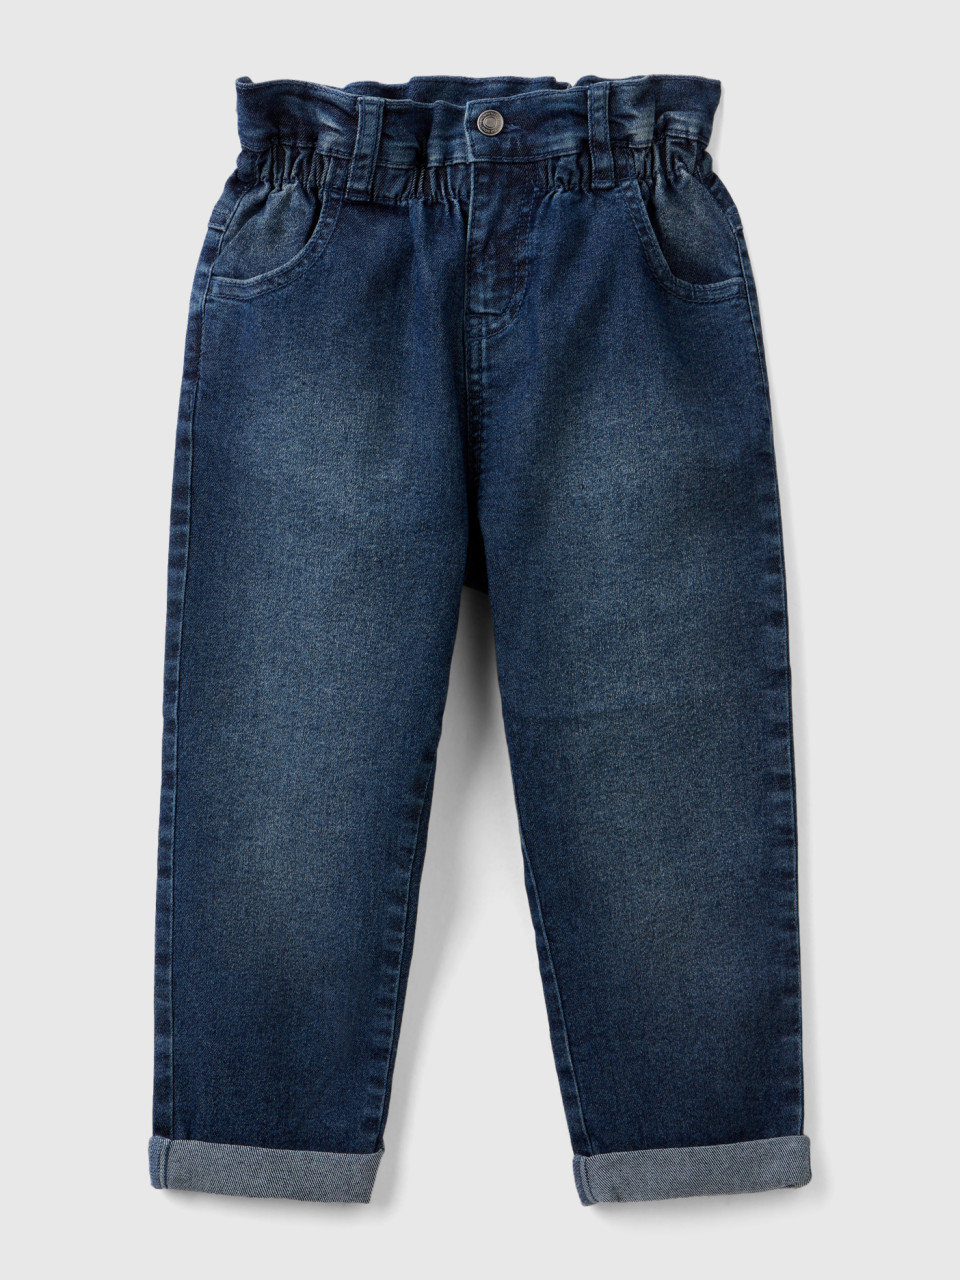 Benetton, eco-recycle Paperbag Jeans, Dark Blue, Kids